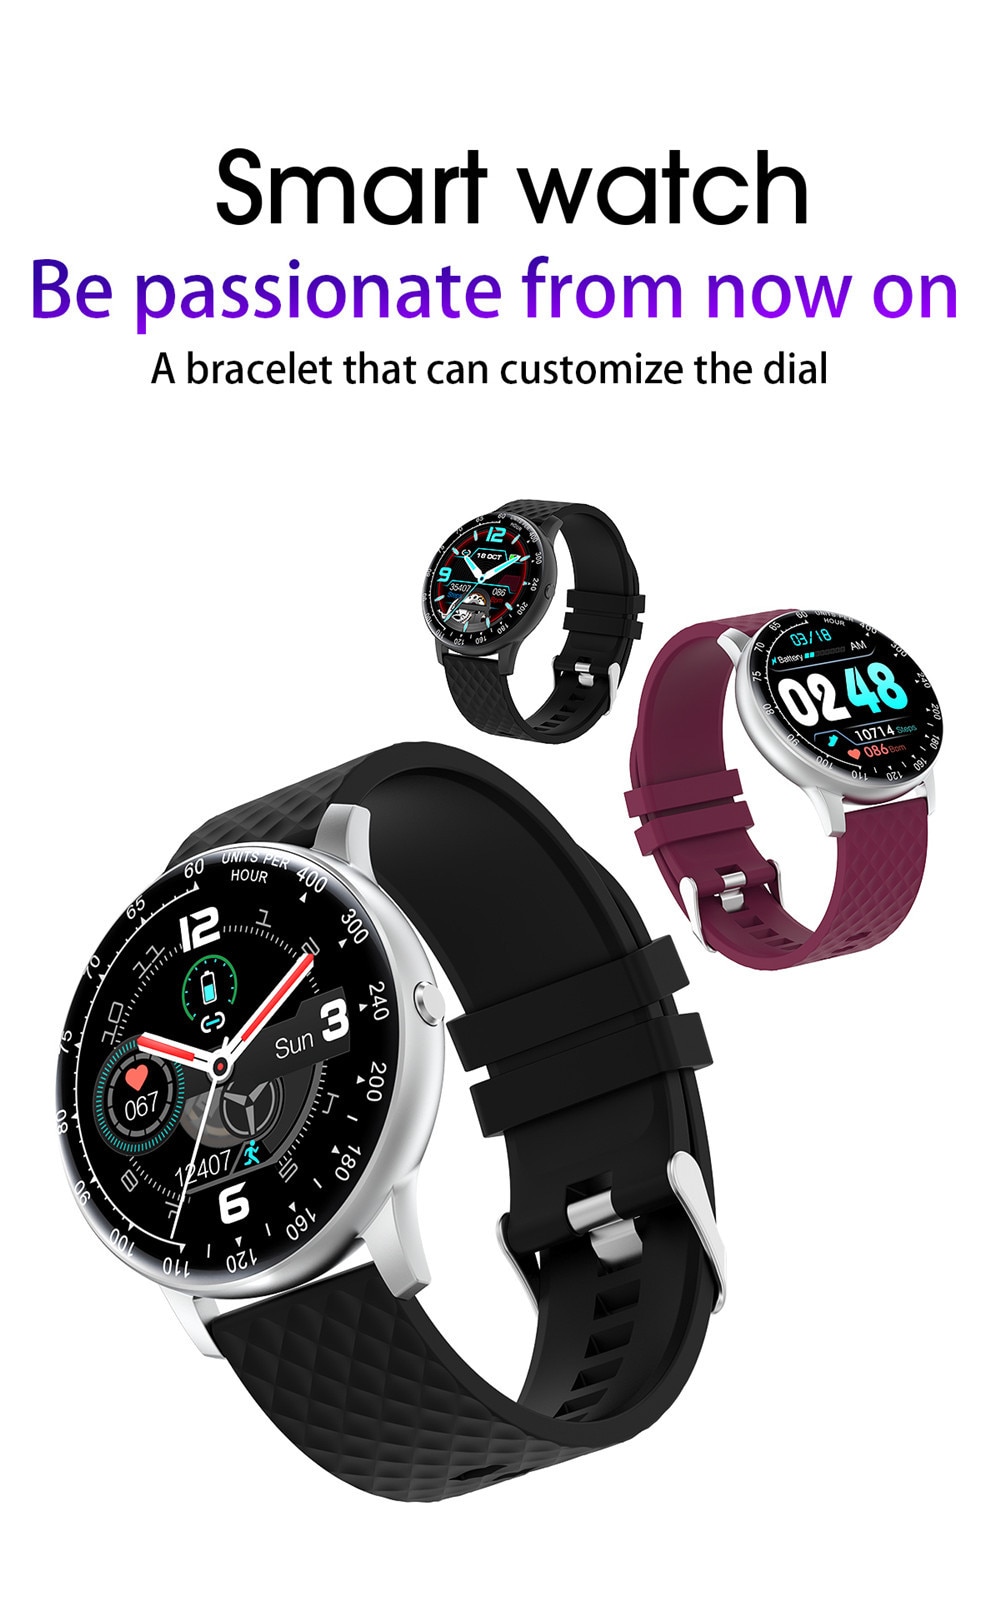 2020 Smart Watch Men Women Blood Pressure Fitness Tracker Smartwatch IP68 Waterproof Full Touch Sport Watches For Android IOS